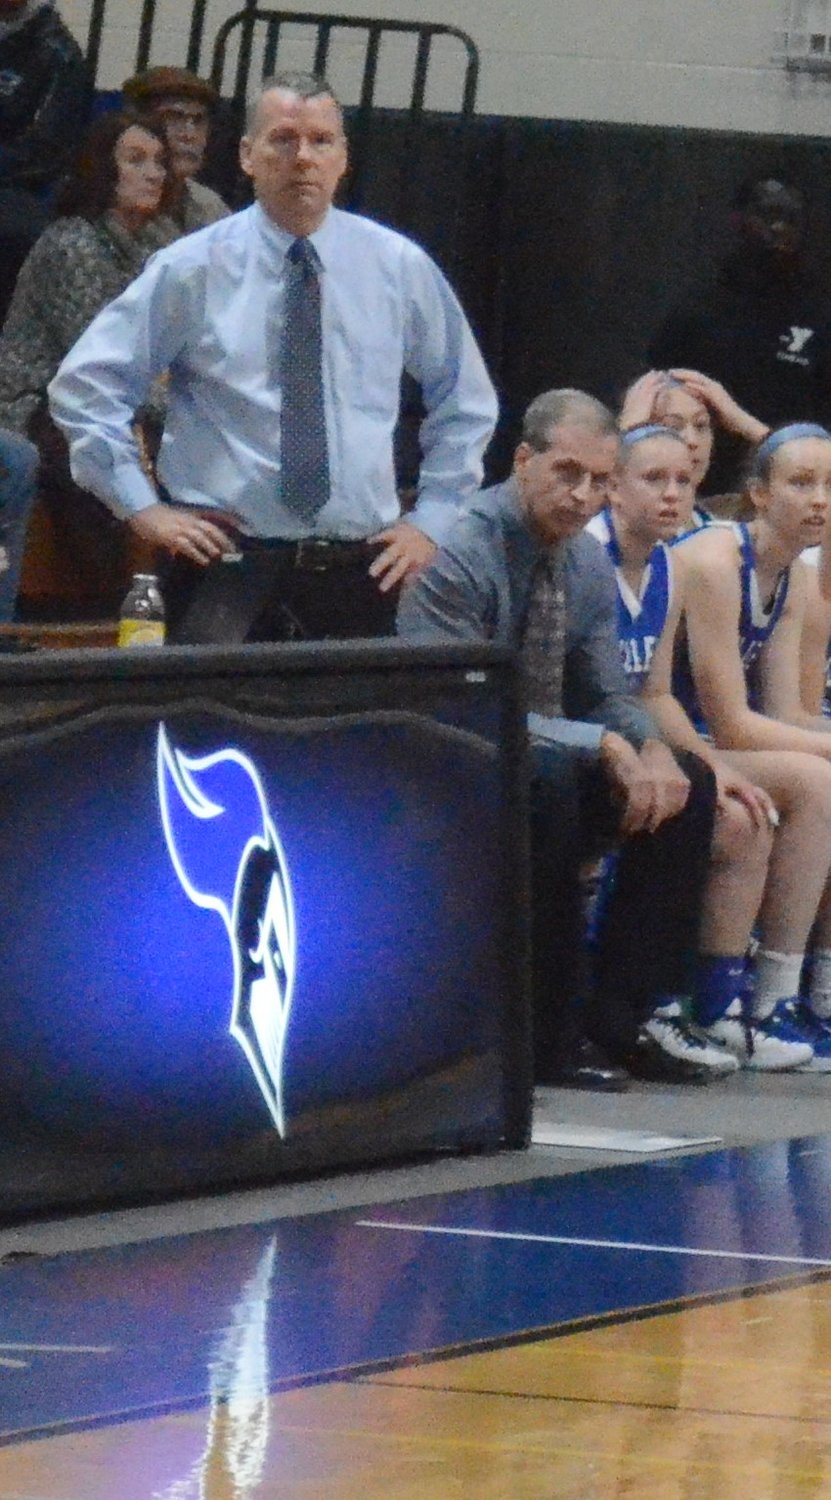 Bill Michella, right, sits behind then-Valley Central girls’ basketball coach Randy Axtell during the Section 9 Class AA championship game at Mount Saint Mary College on March 7.